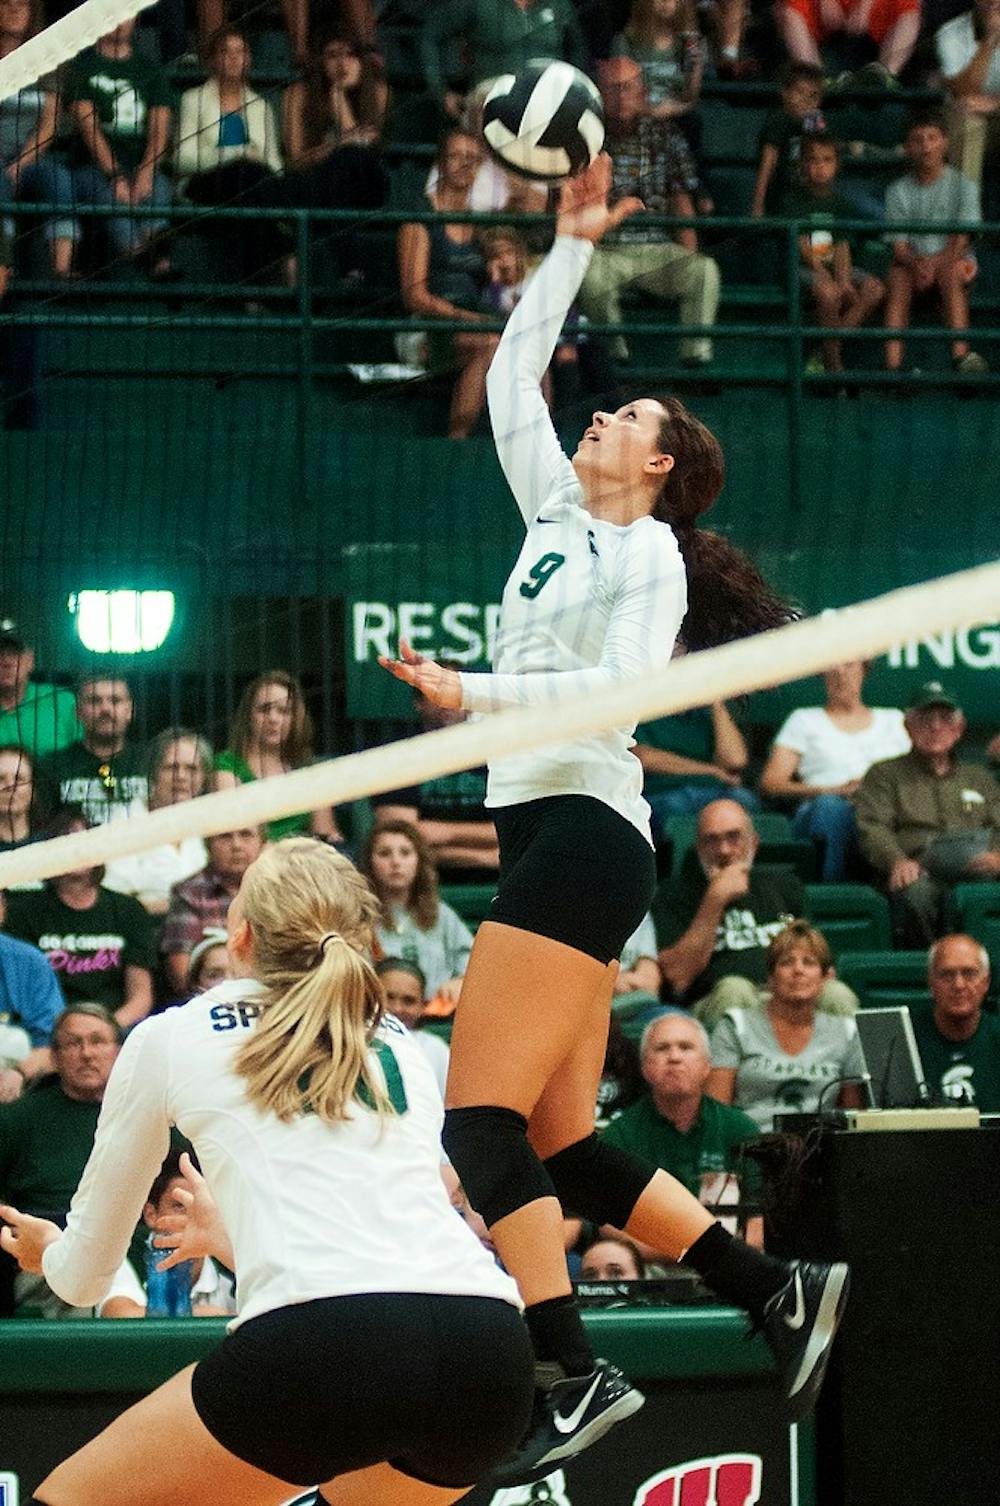 	<p>Junior outsider hitter Taylor Galloway jumps up to hit the ball during the game against Oregon, Sept. 6, 2013, at Jenison Field House. The Spartans defeated Oregon, 3-1. Danyelle Morrow/The State News</p>